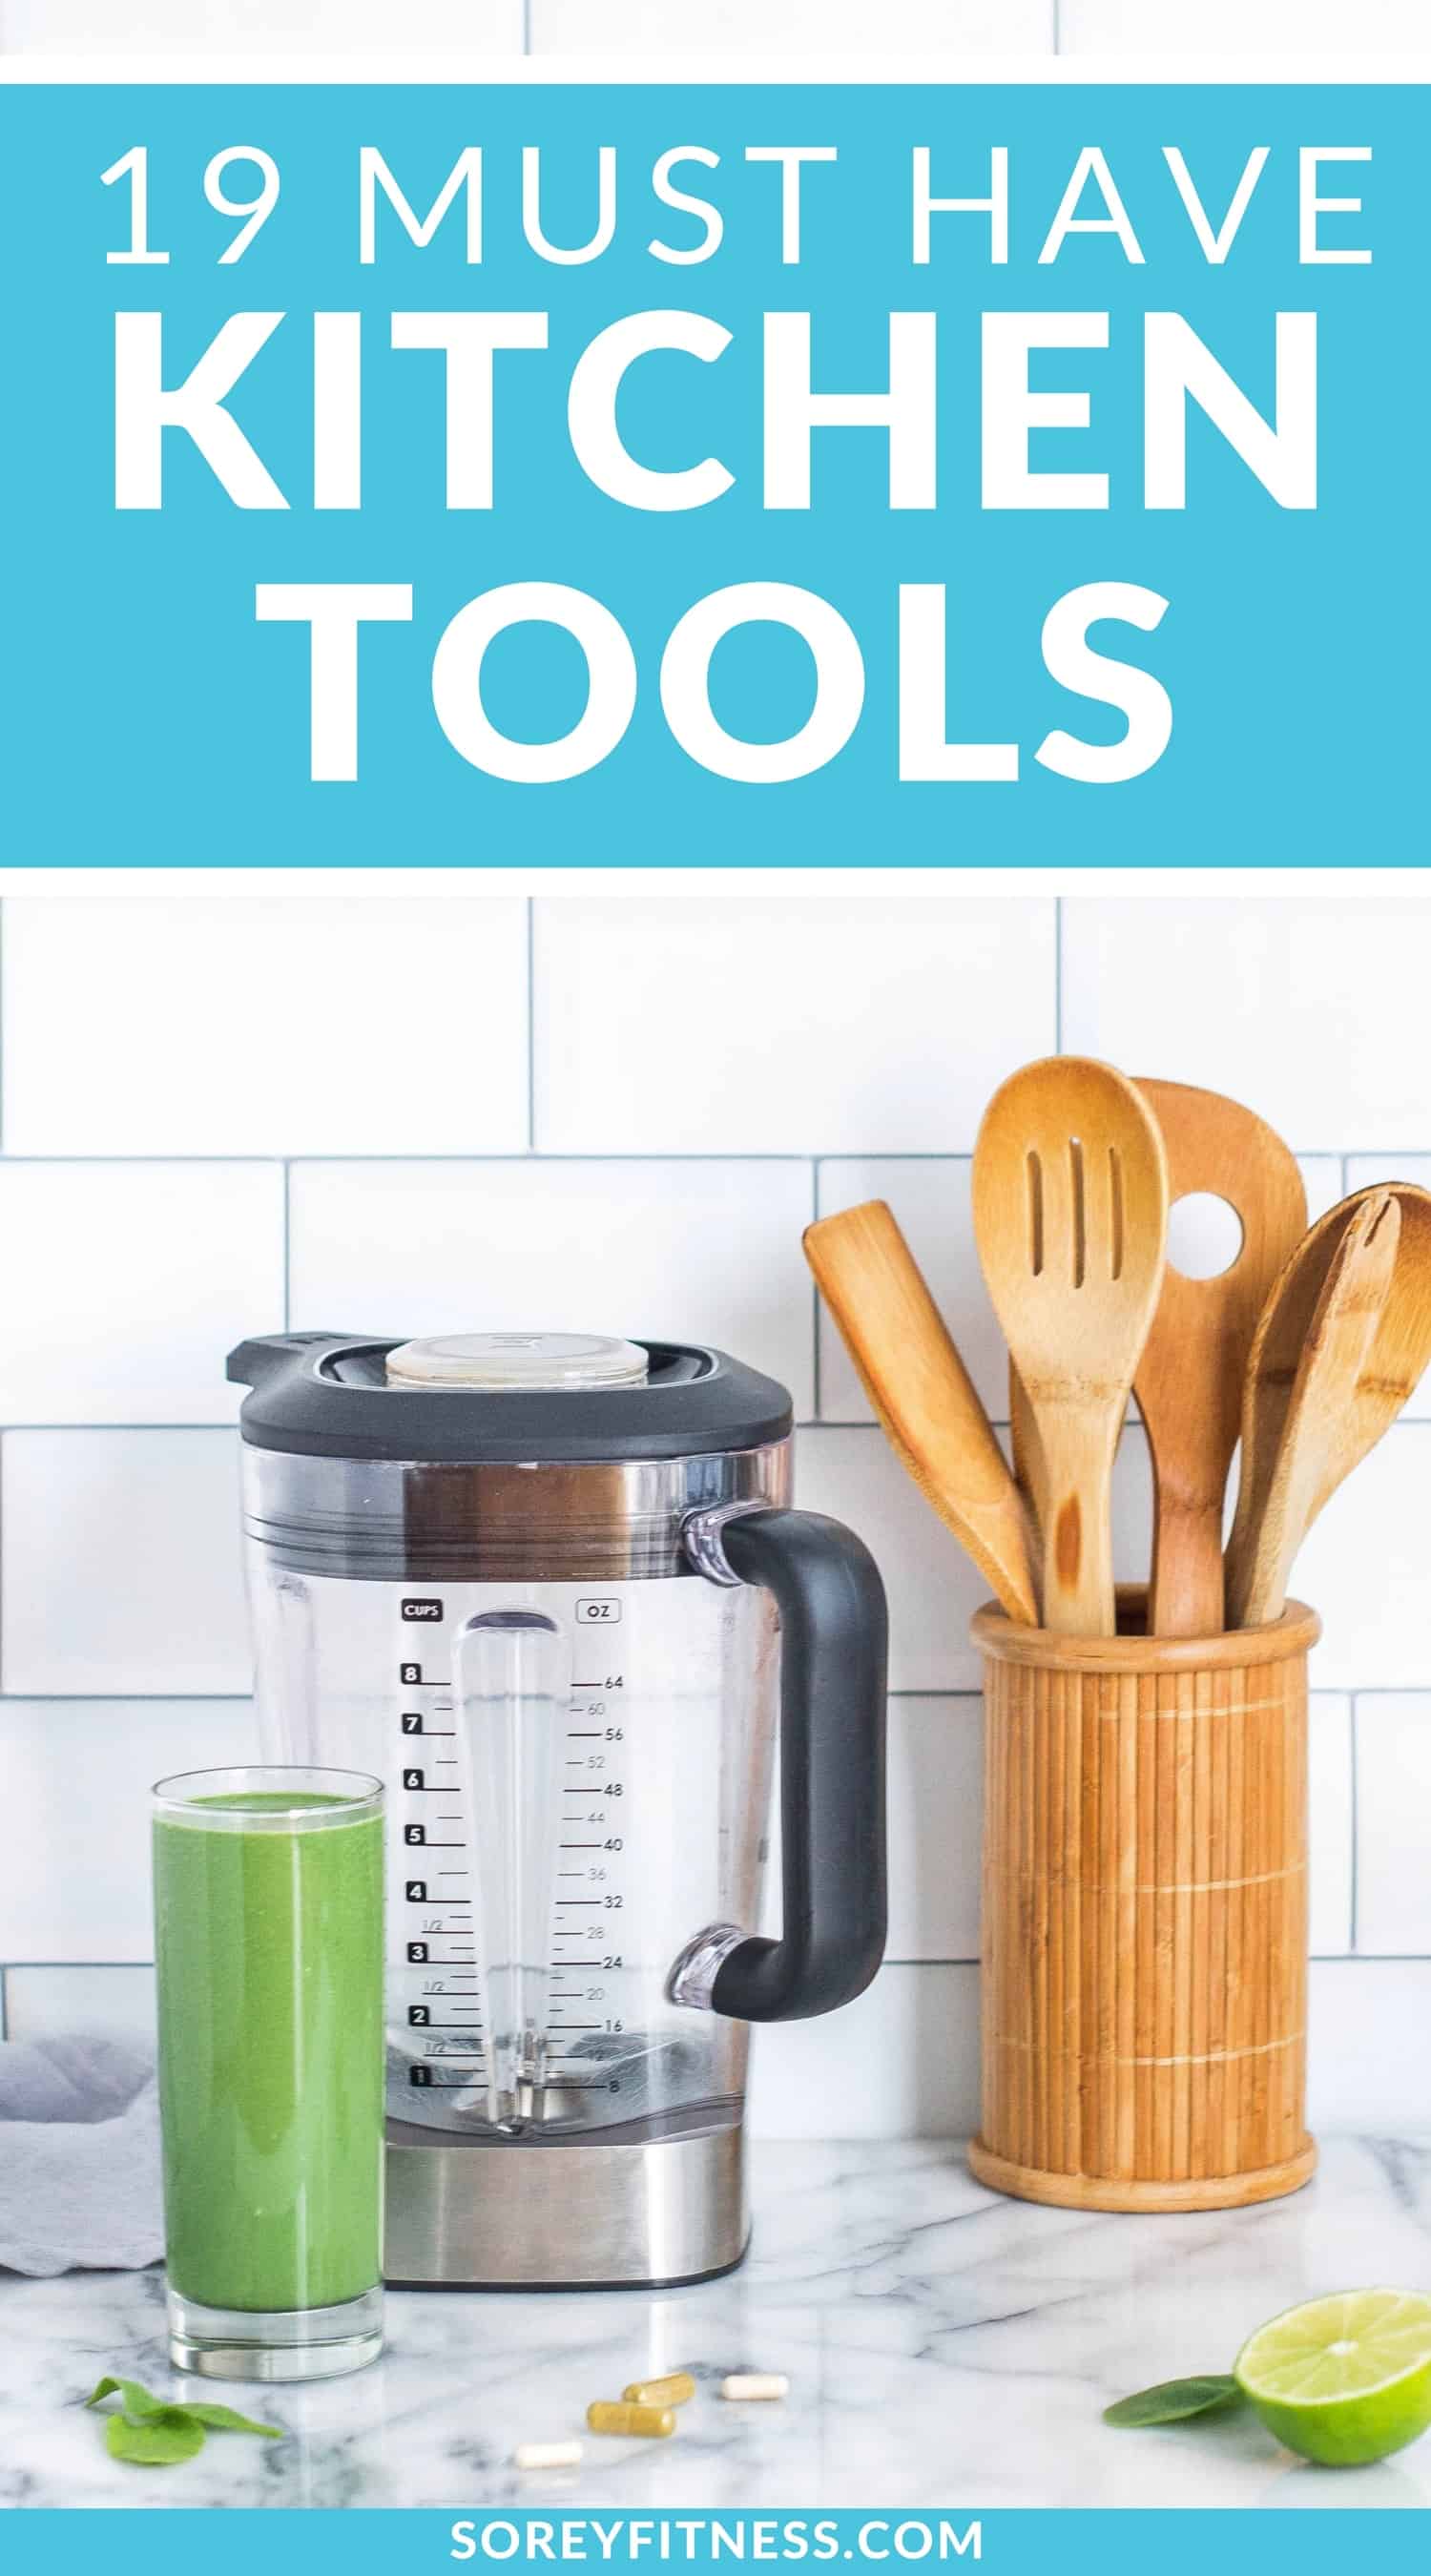 Must Have Kitchen Tools Min 